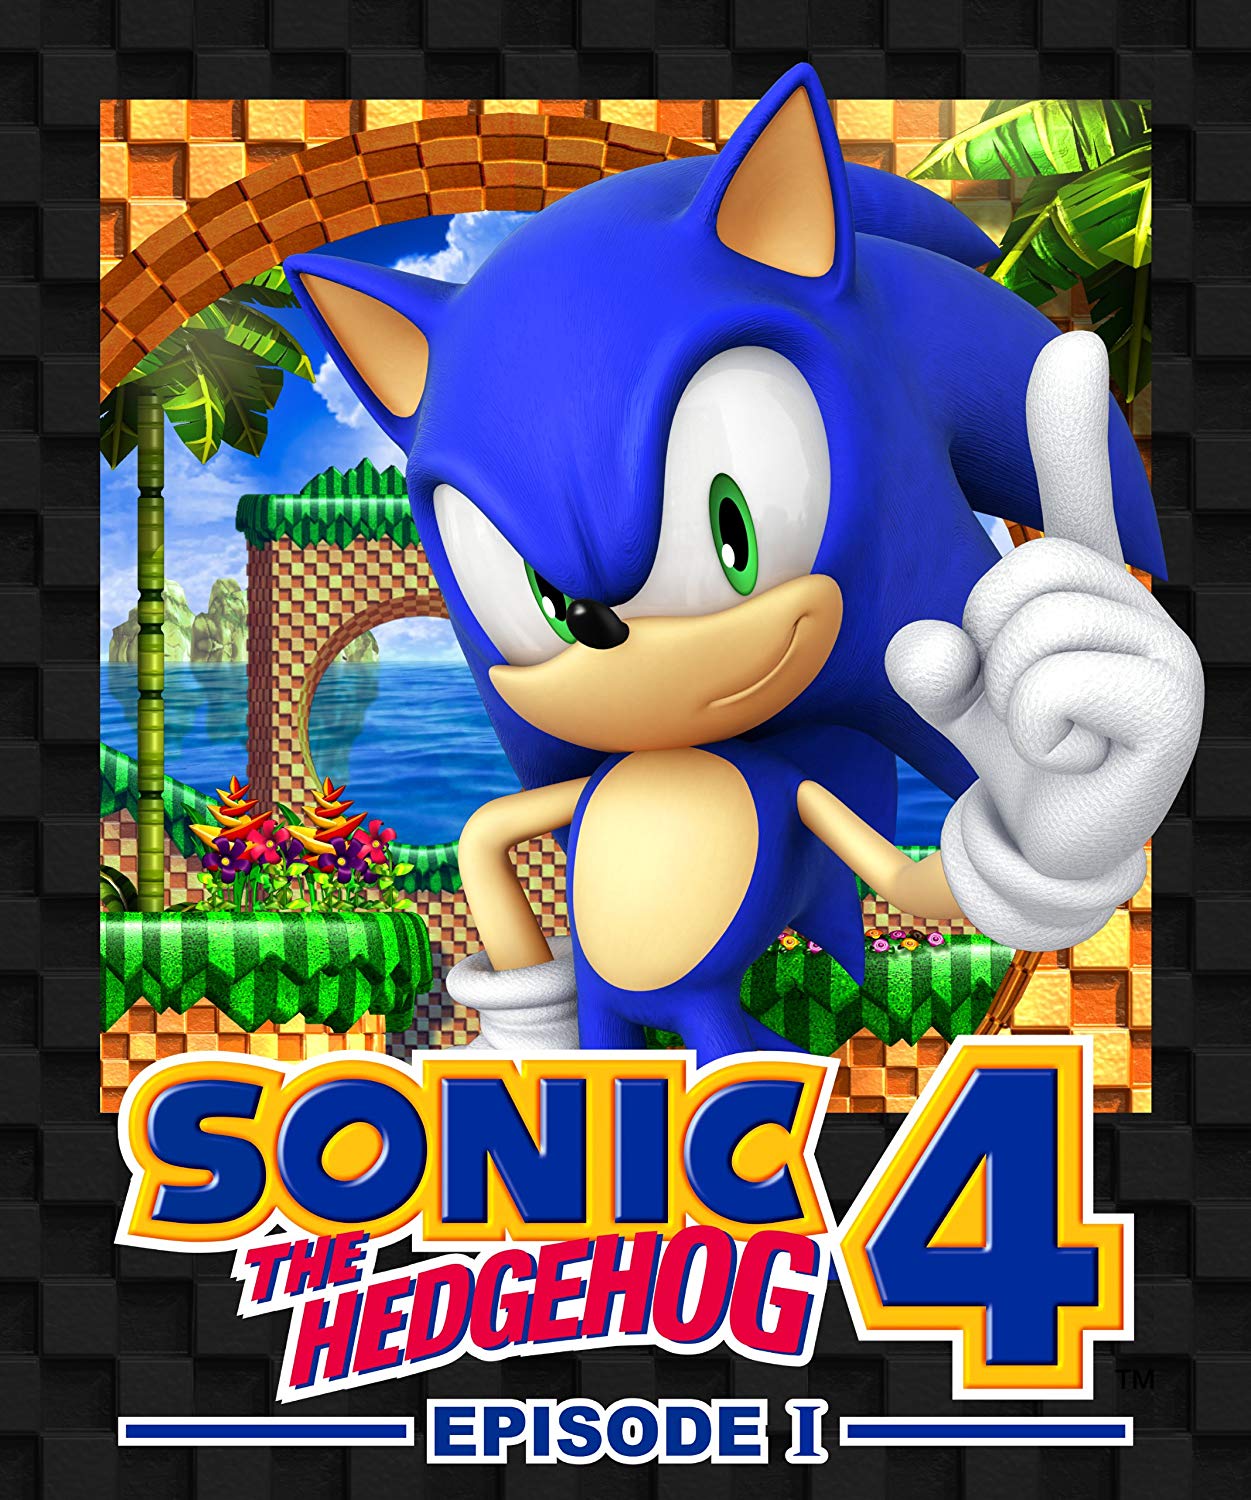 sonic 4 episode 2 review